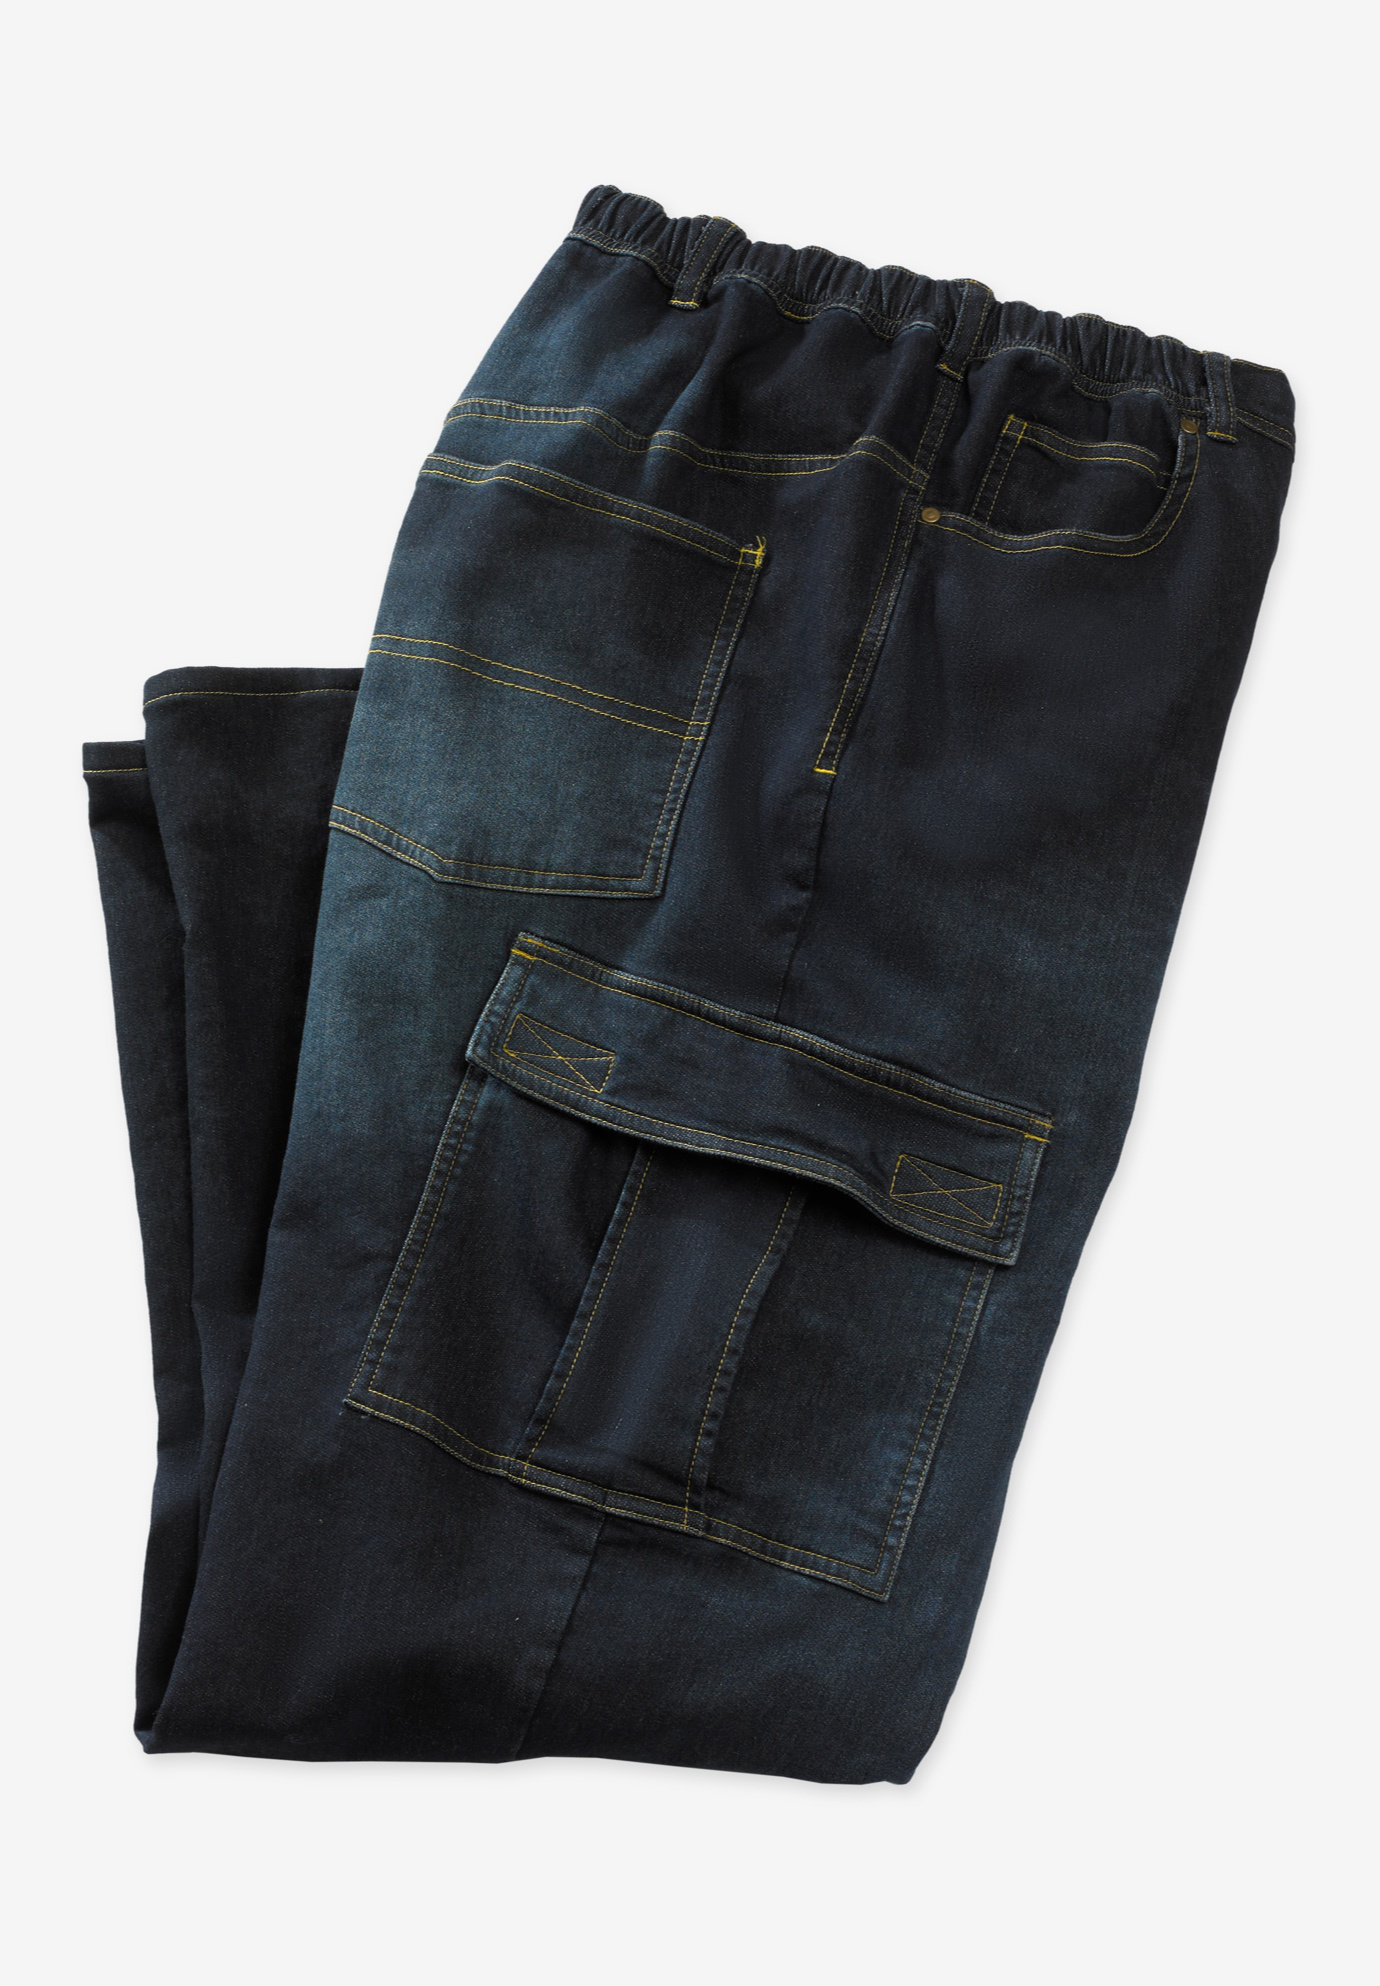 Kingsize Men's Big & Tall Relaxed Fit Cargo Denim Look Sweatpants Jeans - image 5 of 6